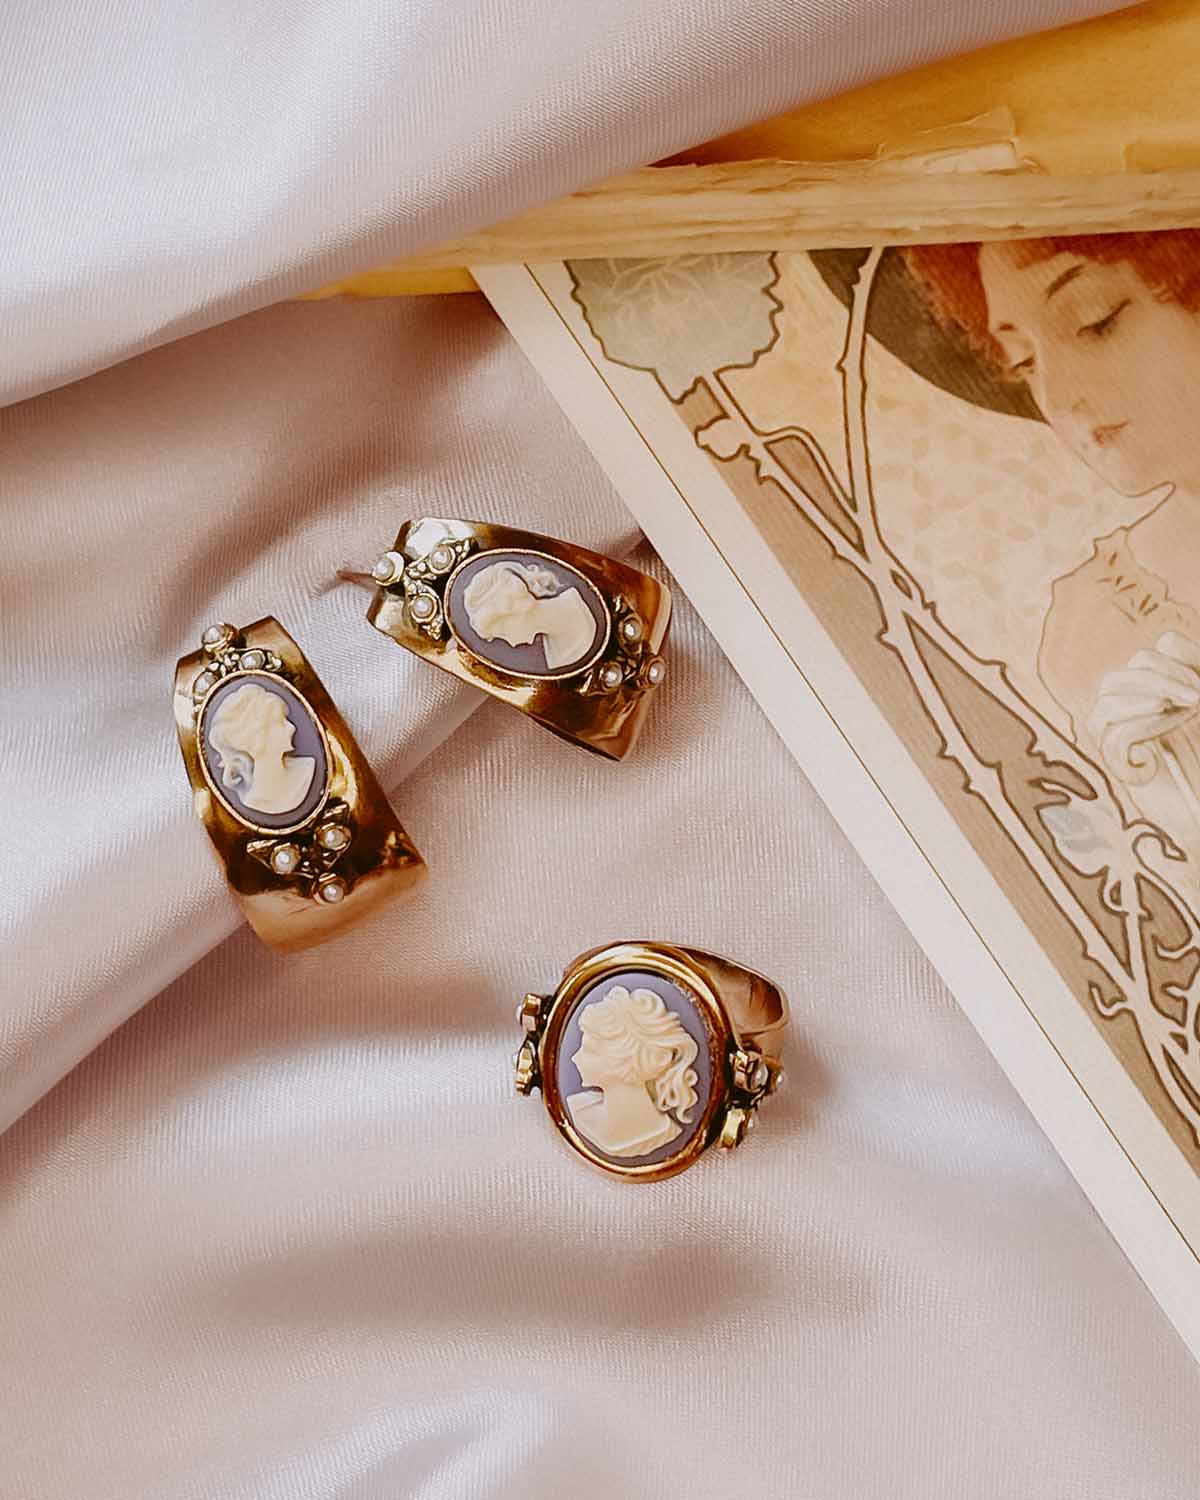 The Montepulciano Grande Earrings (Tuscan Glimmer Edition)